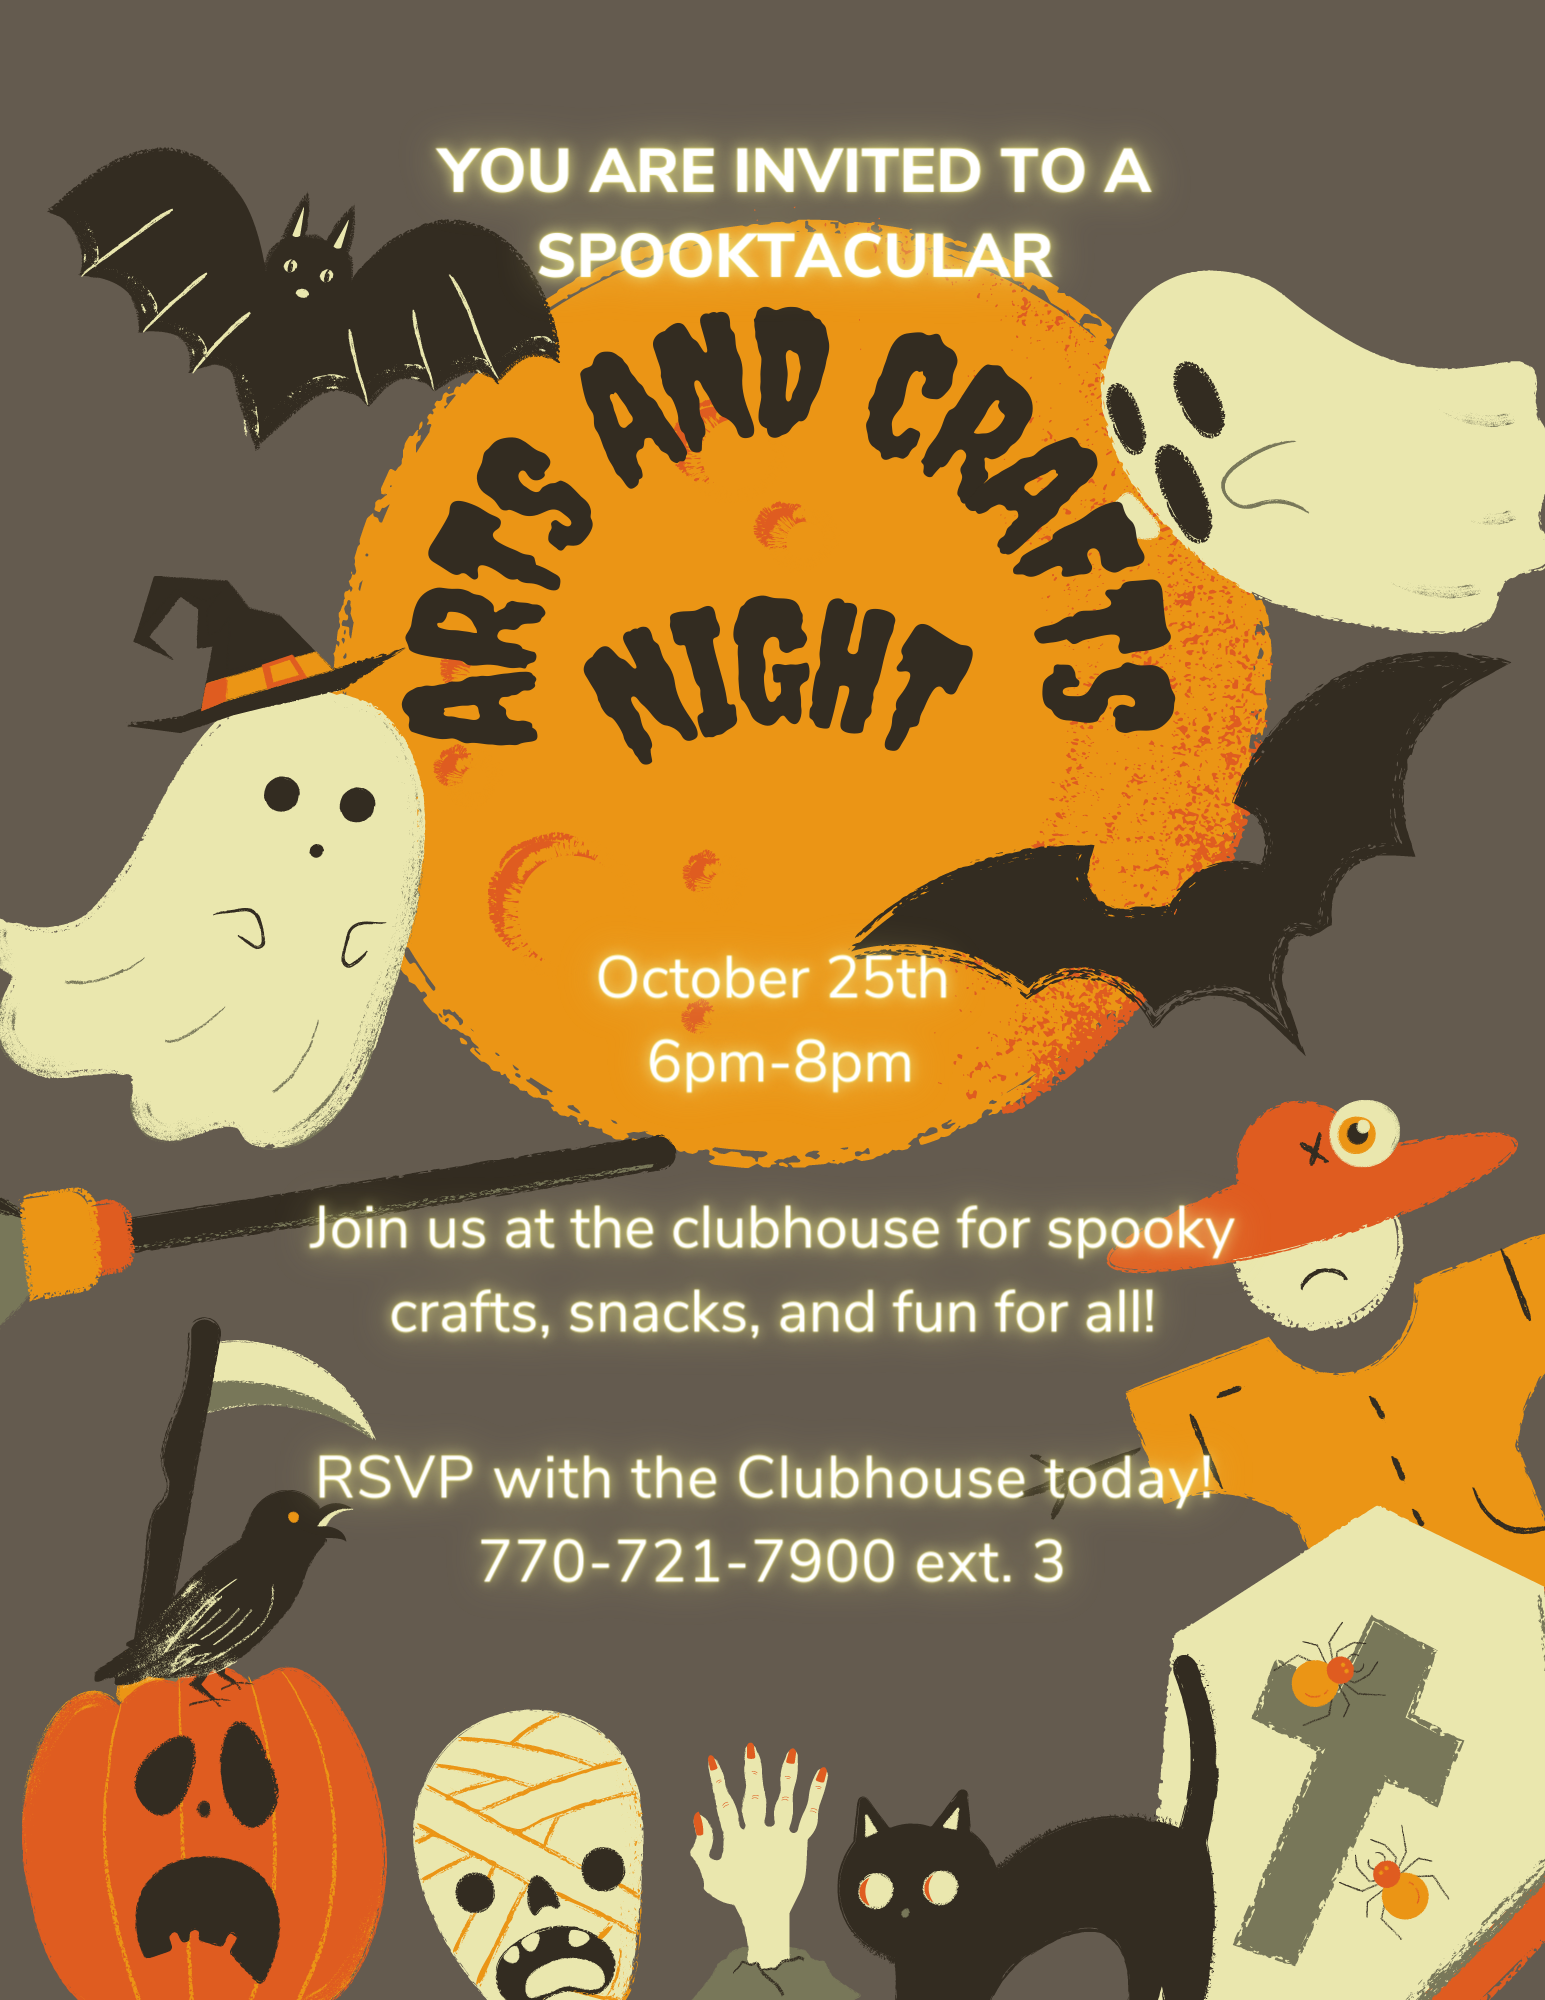 Spooktacular Arts and Crafts Night October 25th